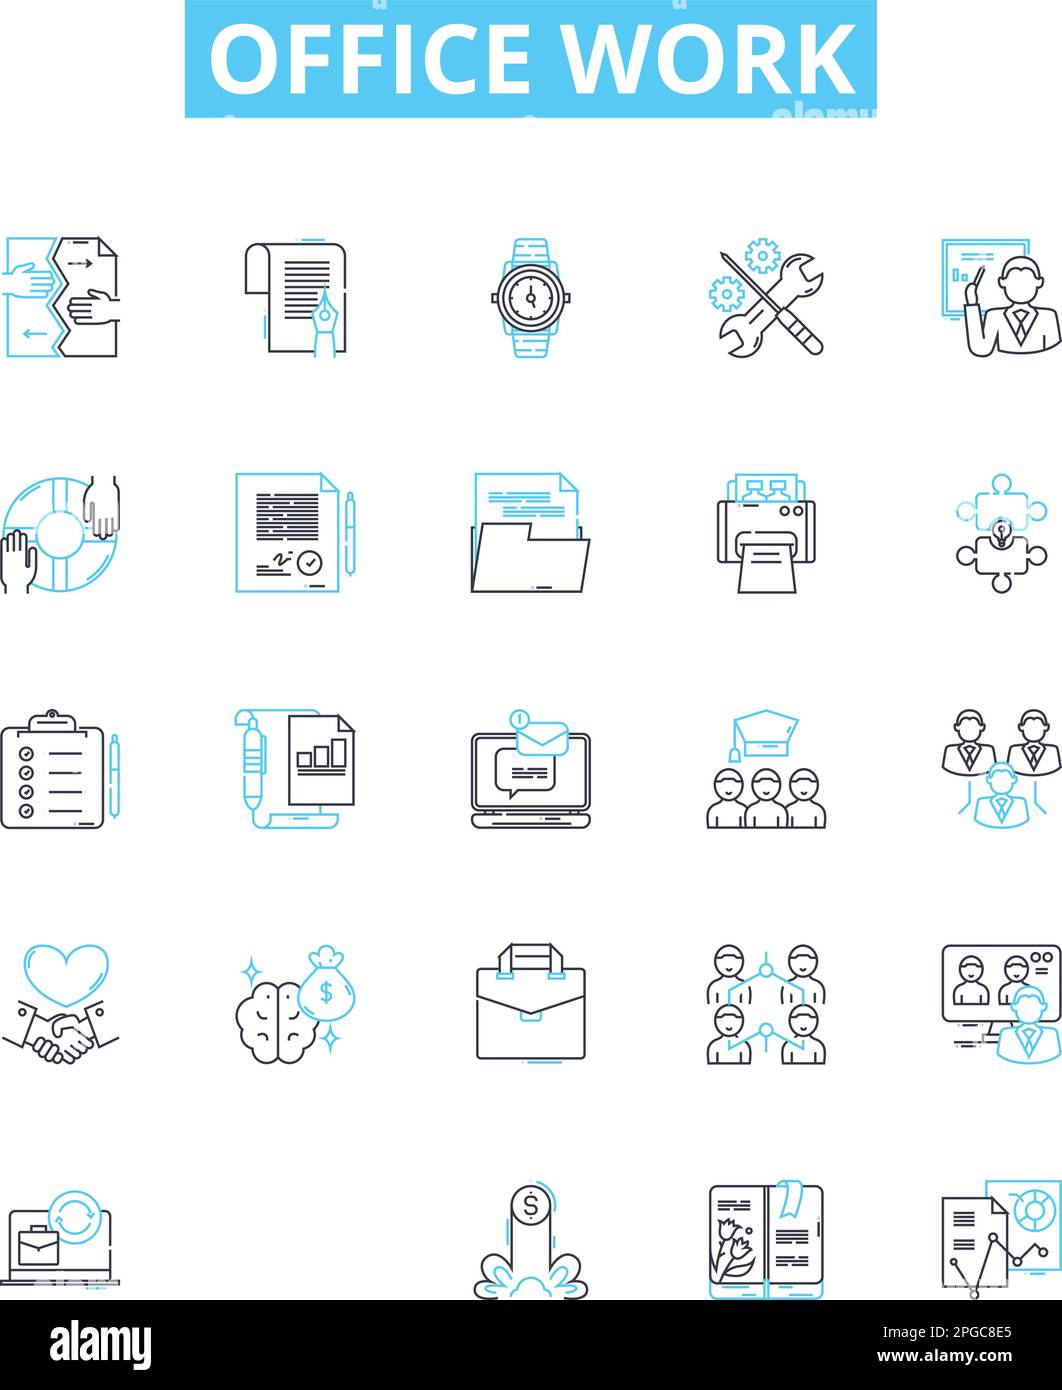 Office work vector line icons set. Office, Work, Documents, Communication, Meetings, Technology, Analysis illustration outline concept symbols and Stock Vector